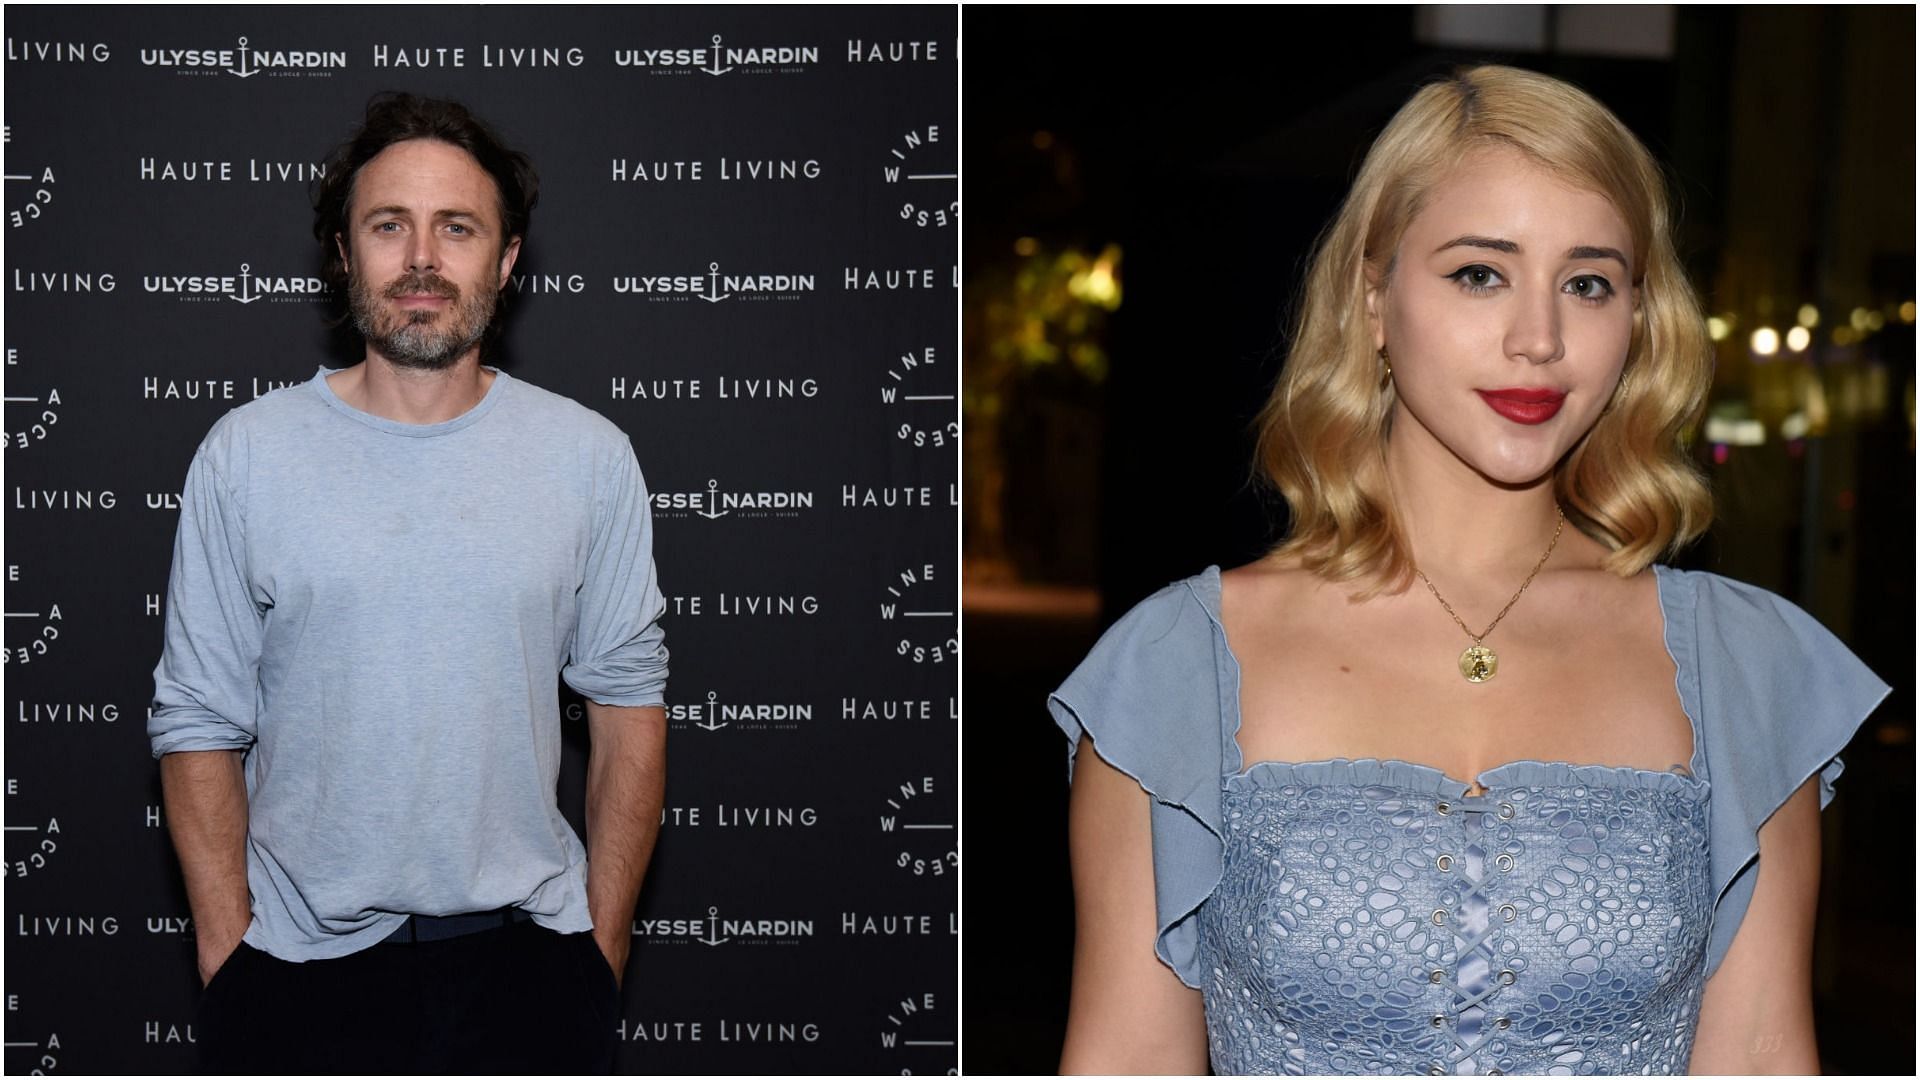 Casey Affleck and Caylee Cowan were recently spotted together (Images via Getty Images/Vivien Killilea)